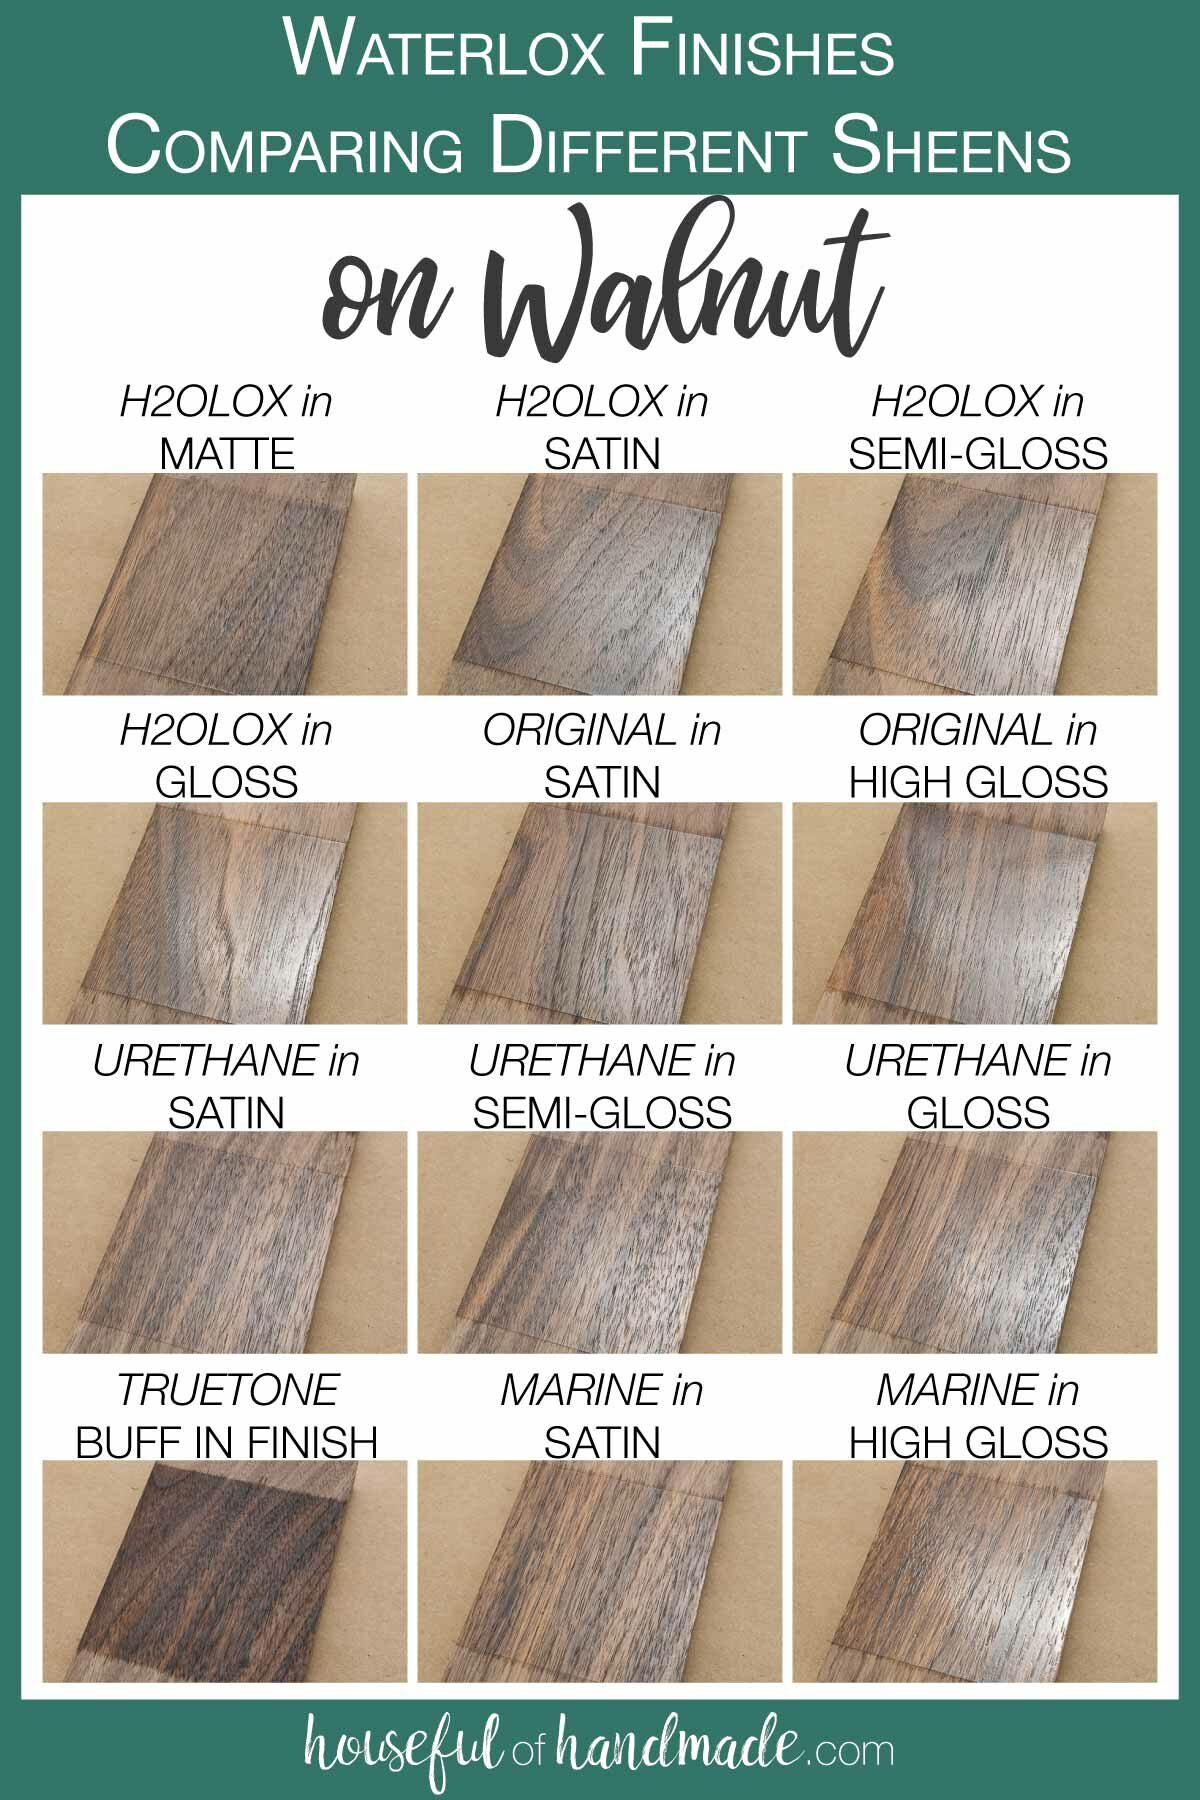 12 samples of the different sheens of all the Waterlox finishes on Walnut boards. 